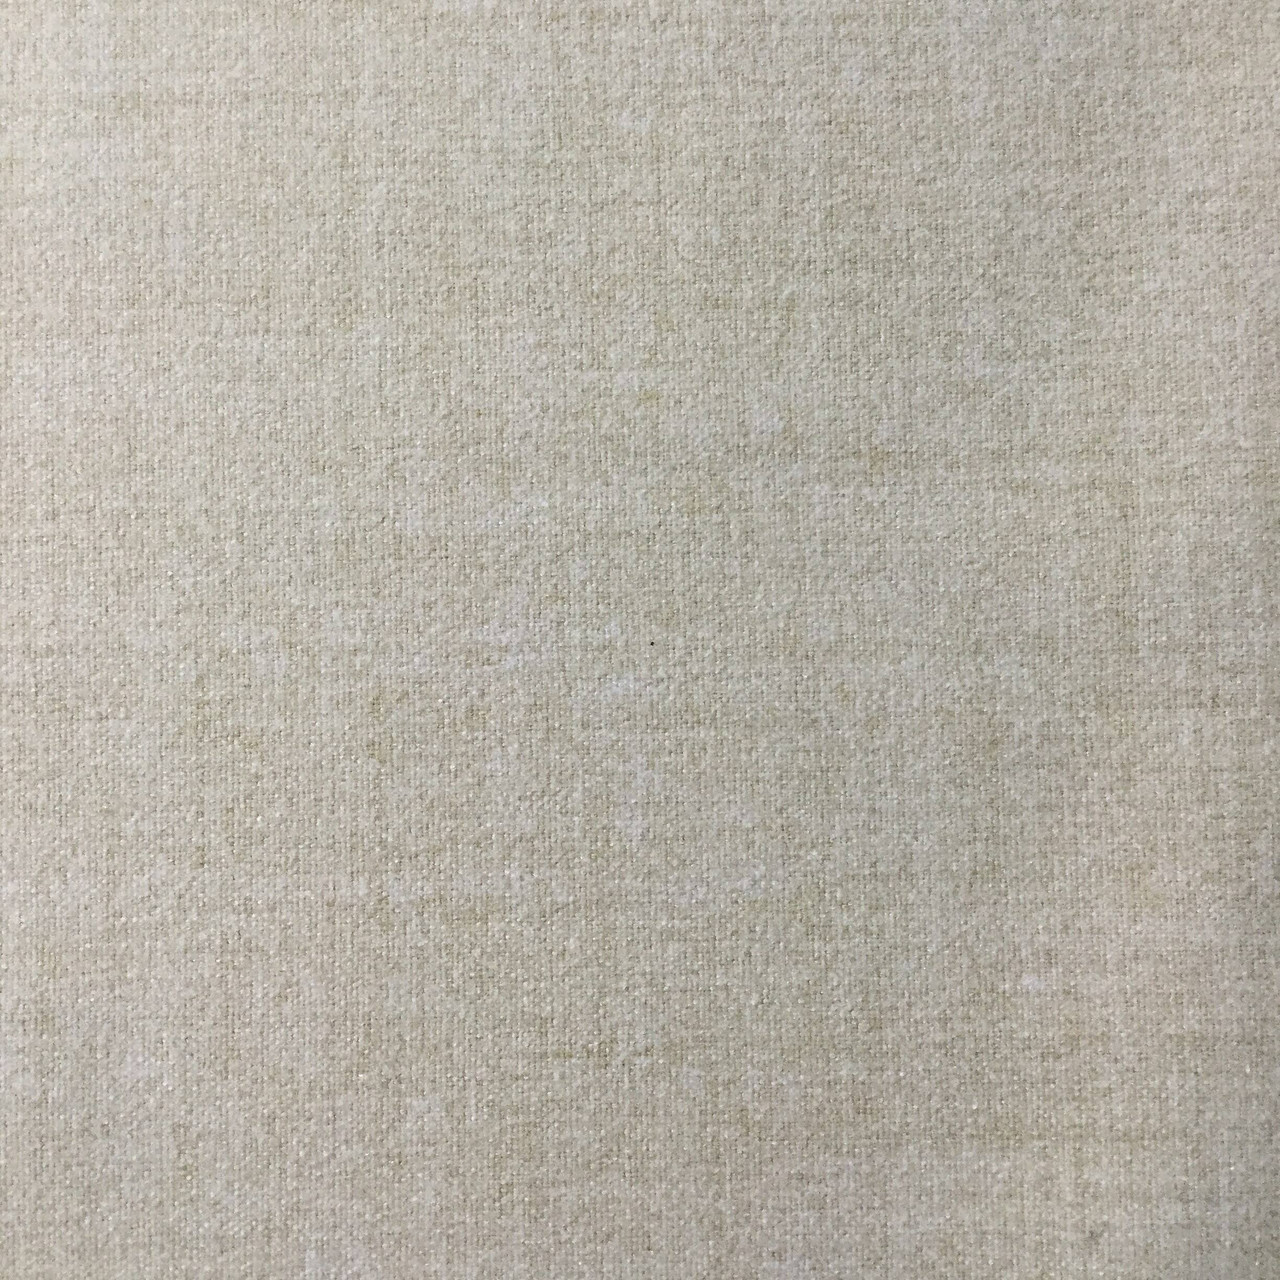 Wool FABRIC by the yard, coat or upholstery material, Gray/Natural